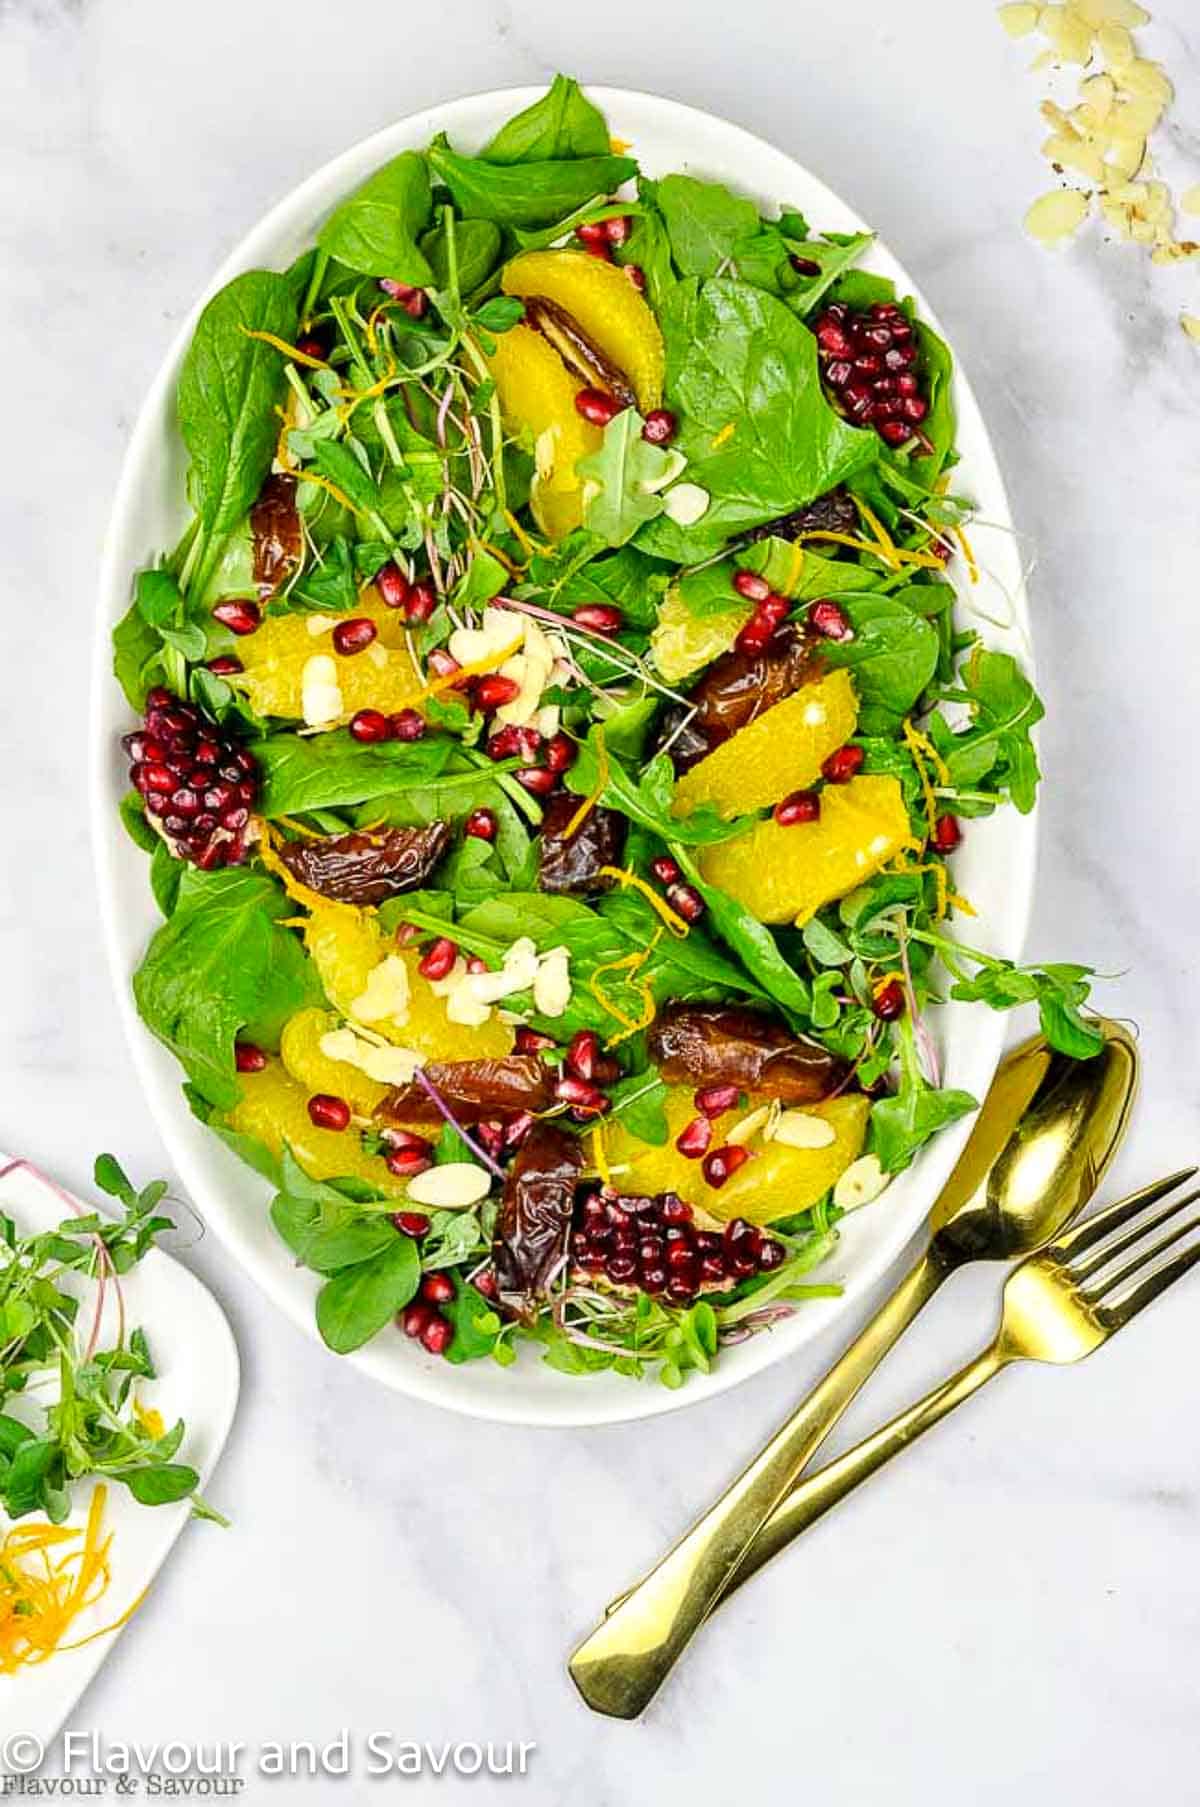 An oval white serving bowl with fresh baby spinach, arugula and oranges, dates and pomegranate arils.